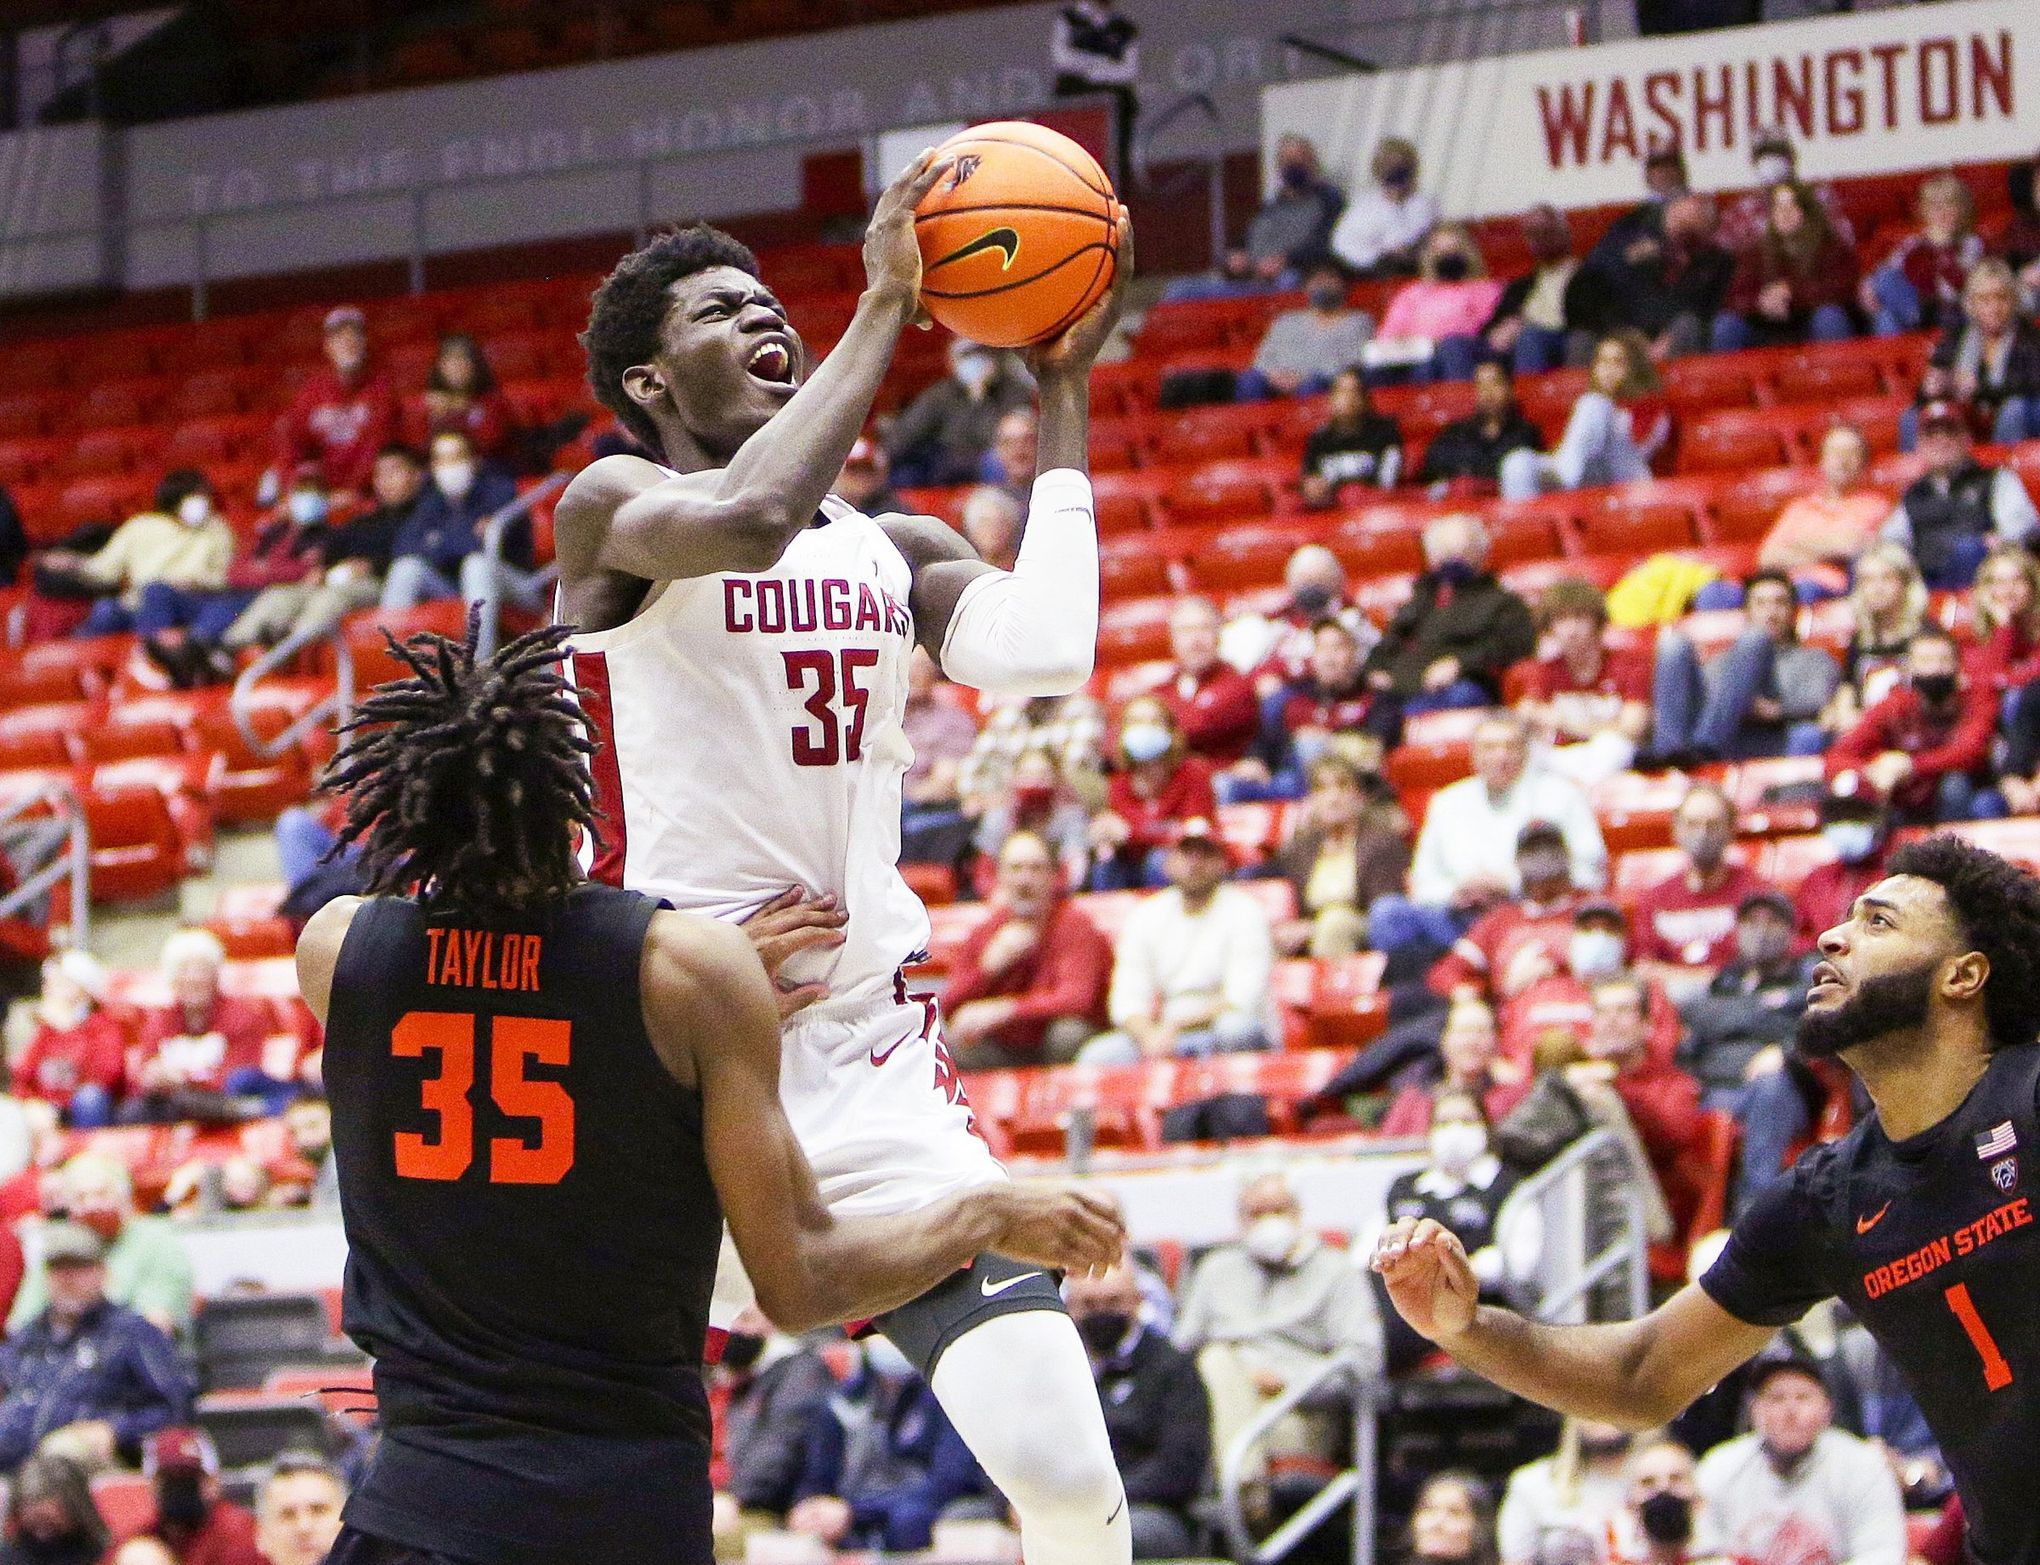 WSU's Gueye selected in second round of NBA draft, Sports news, Lewiston  Tribune